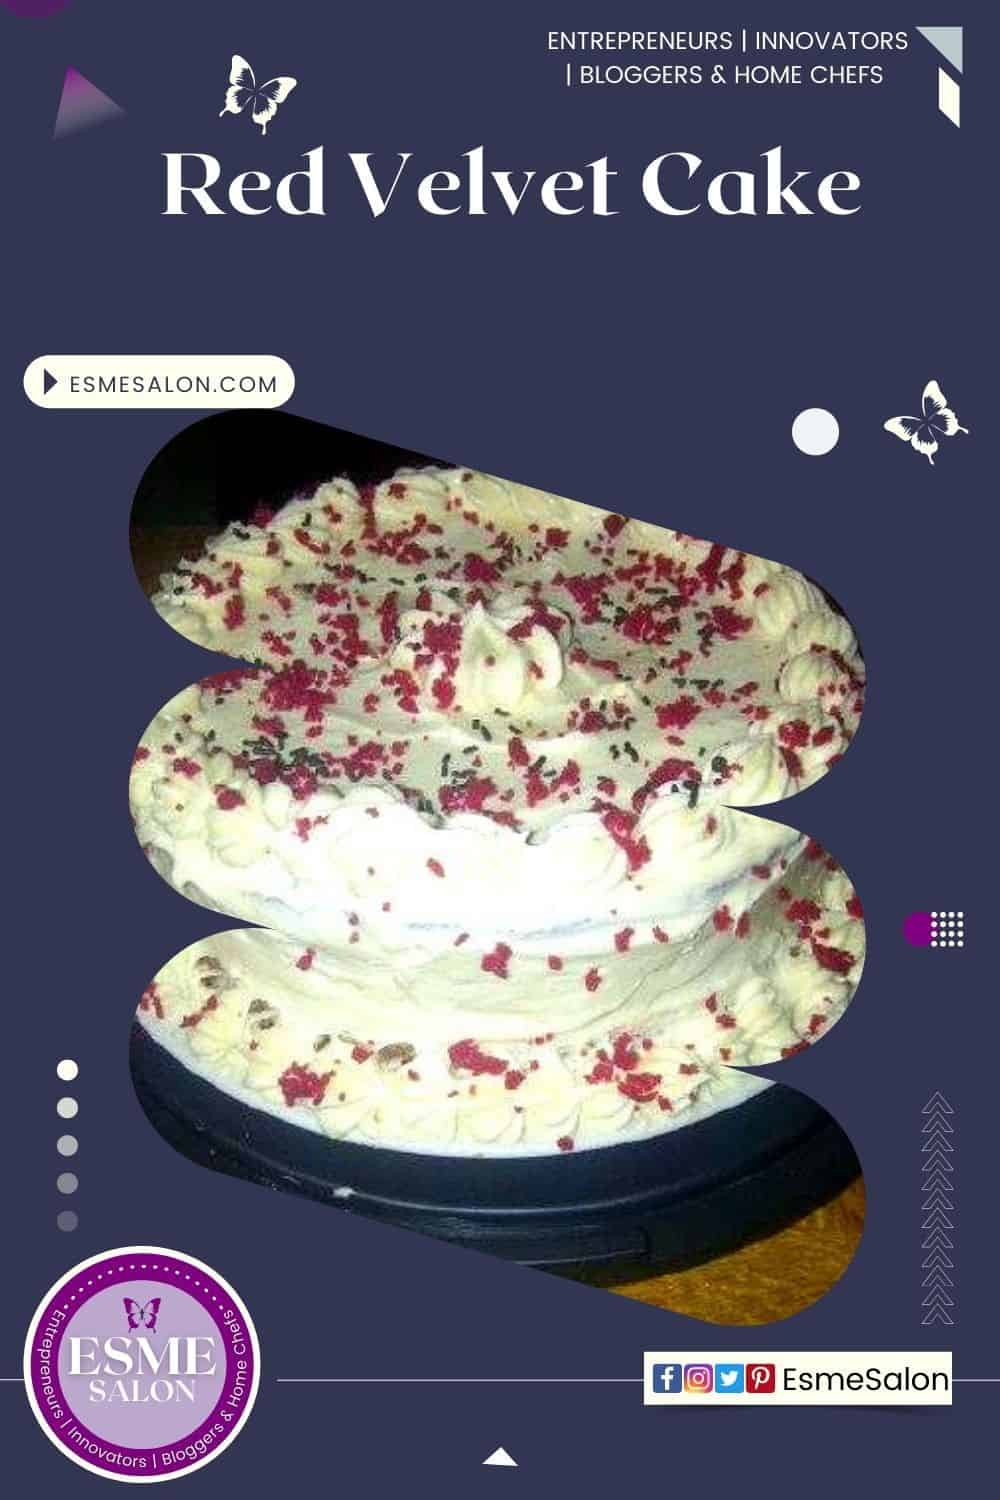 Image of a Red Velvet Cake covered with buttermilk an crushed red velvet cake and chocolate sprinkles as decoration